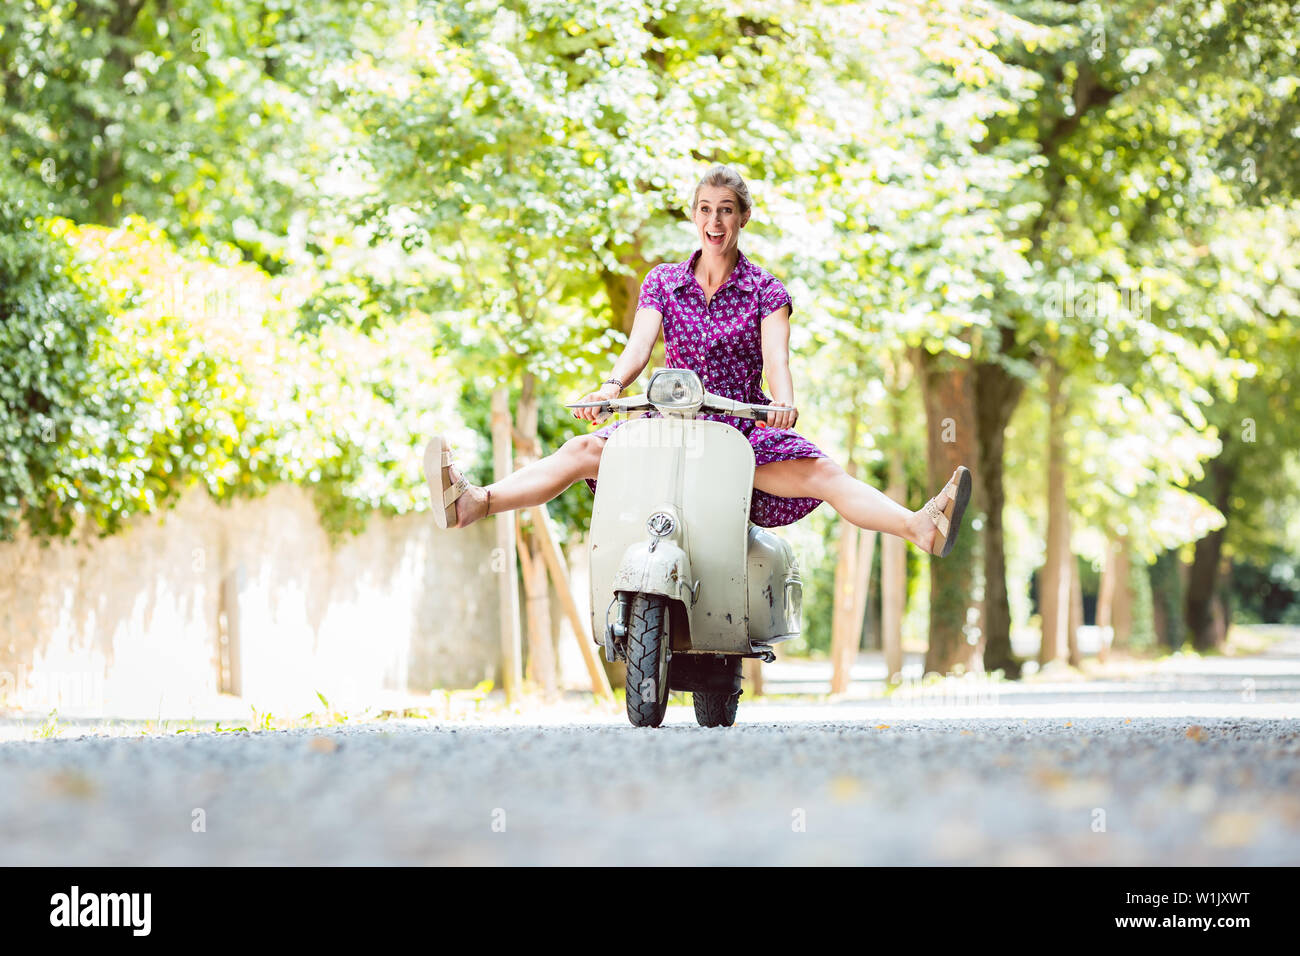 Carefree young woman driving scooter Stock Photo